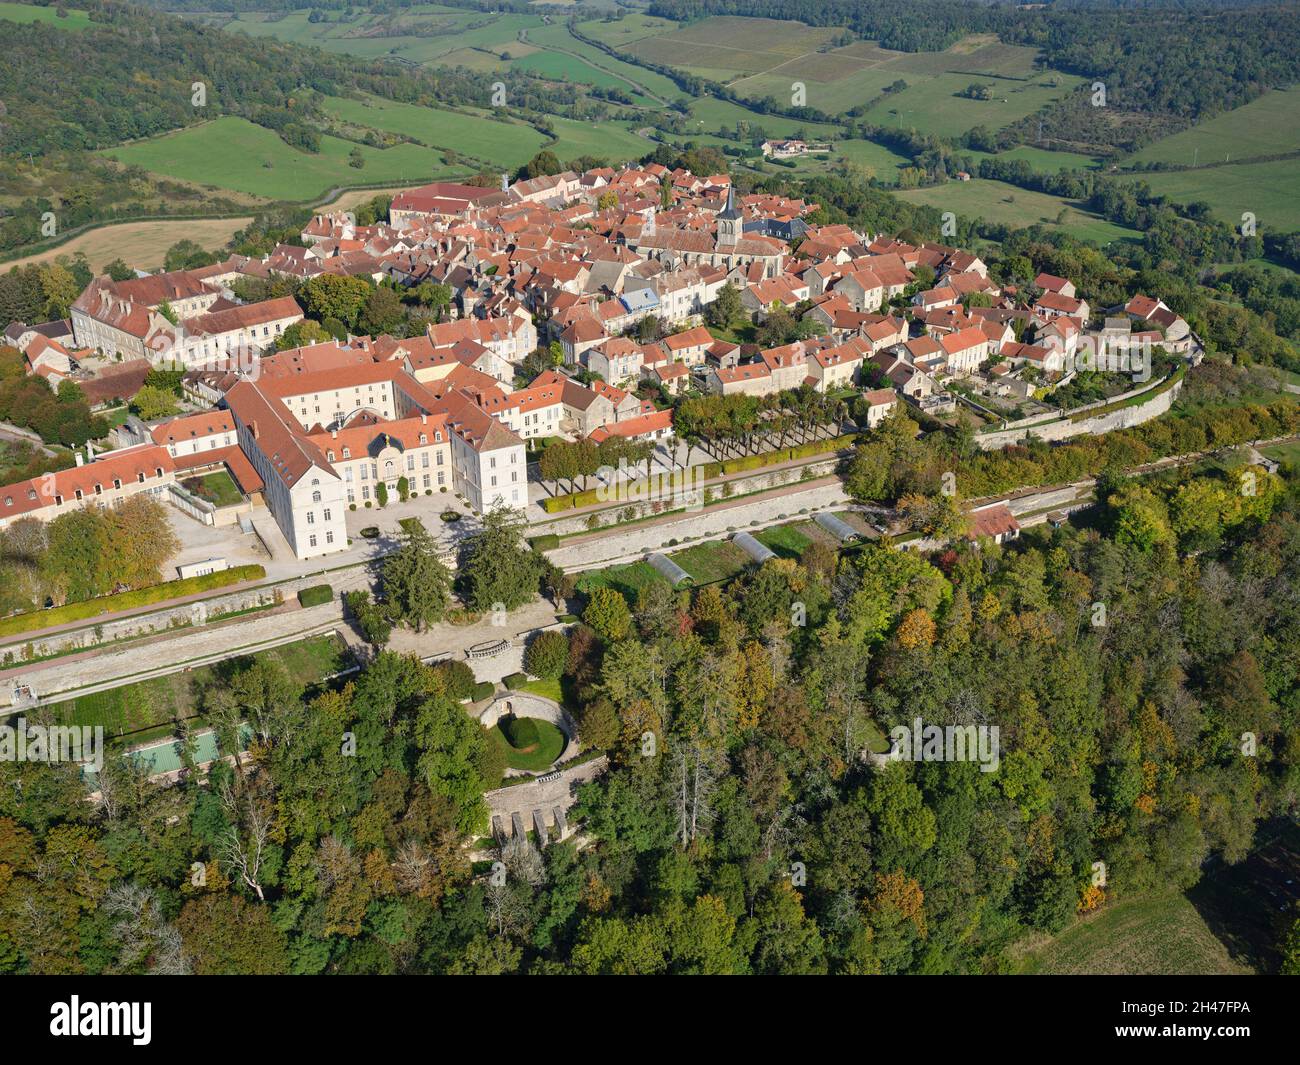 AERIAL VIEW. Small town on a promontory overlooking the Ozerain Valley. Flavigny-sur-Ozerain, Côte d'Or, Bourgogne-Franche-Comté, France. Stock Photo